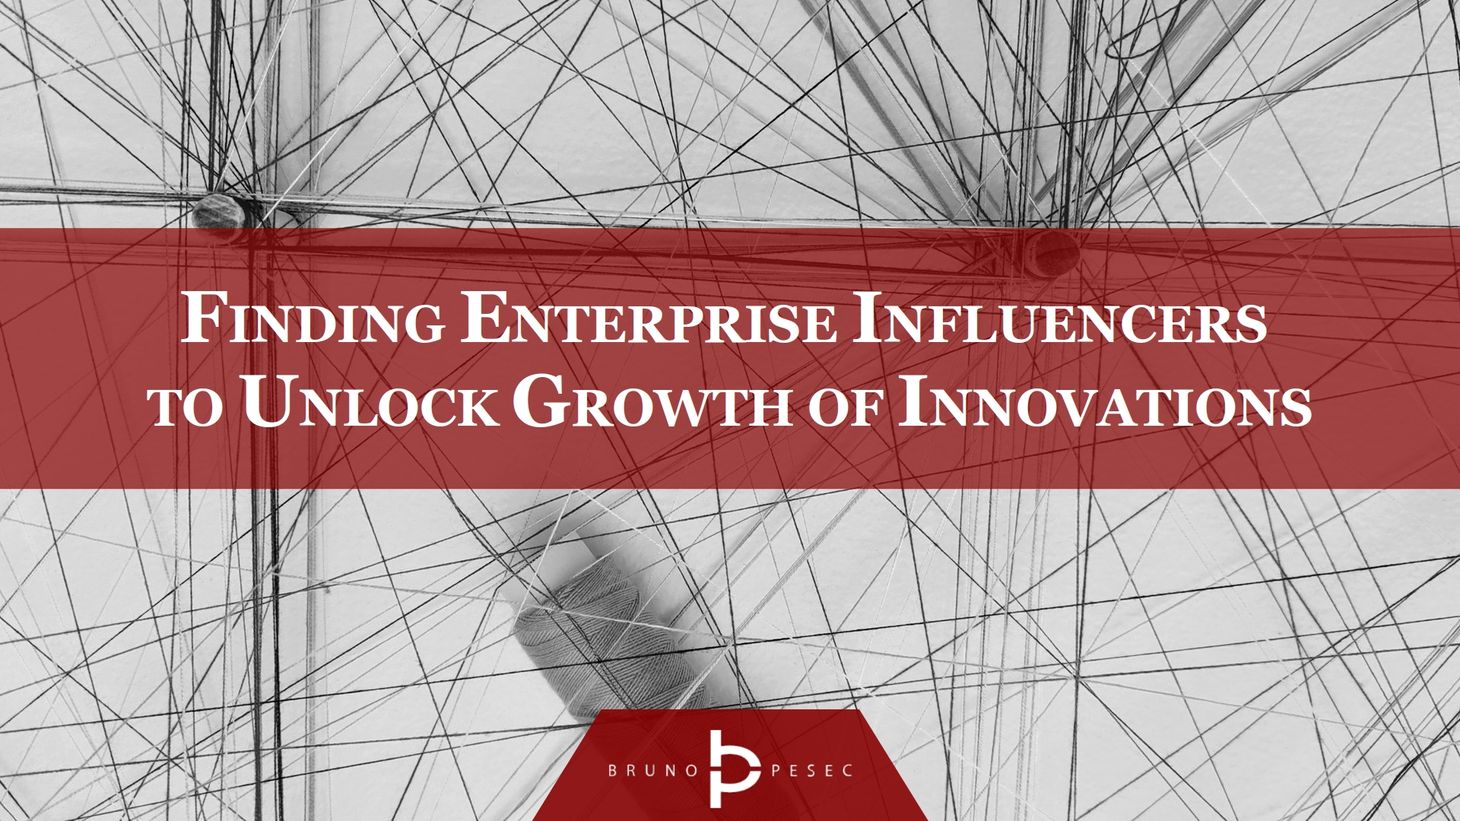 Finding enterprise influencers to unlock growth of innovations